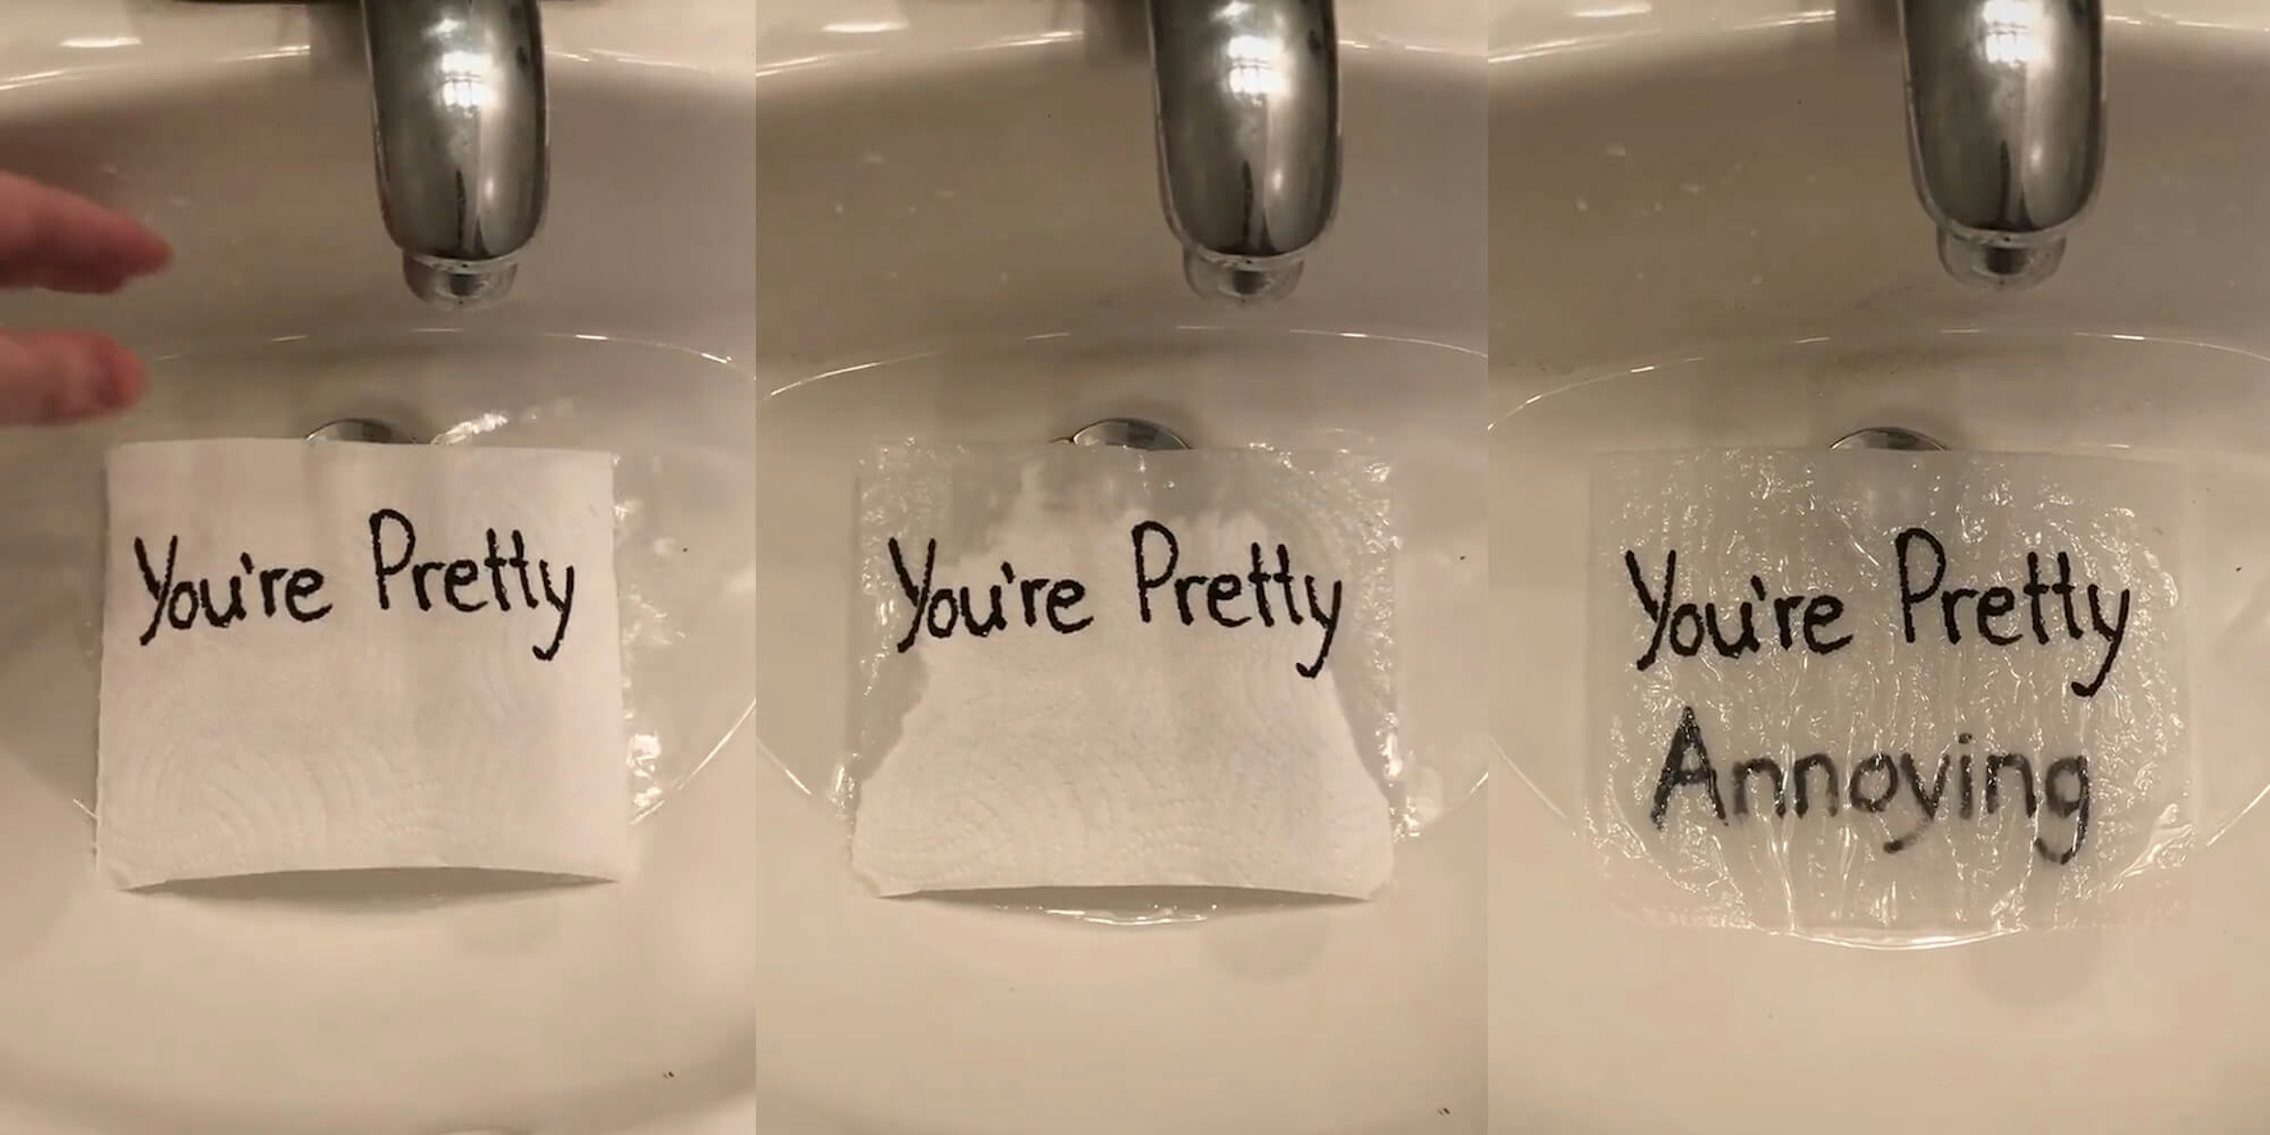 'you're pretty' message on paper towel becomes 'you're pretty annoying' when wet